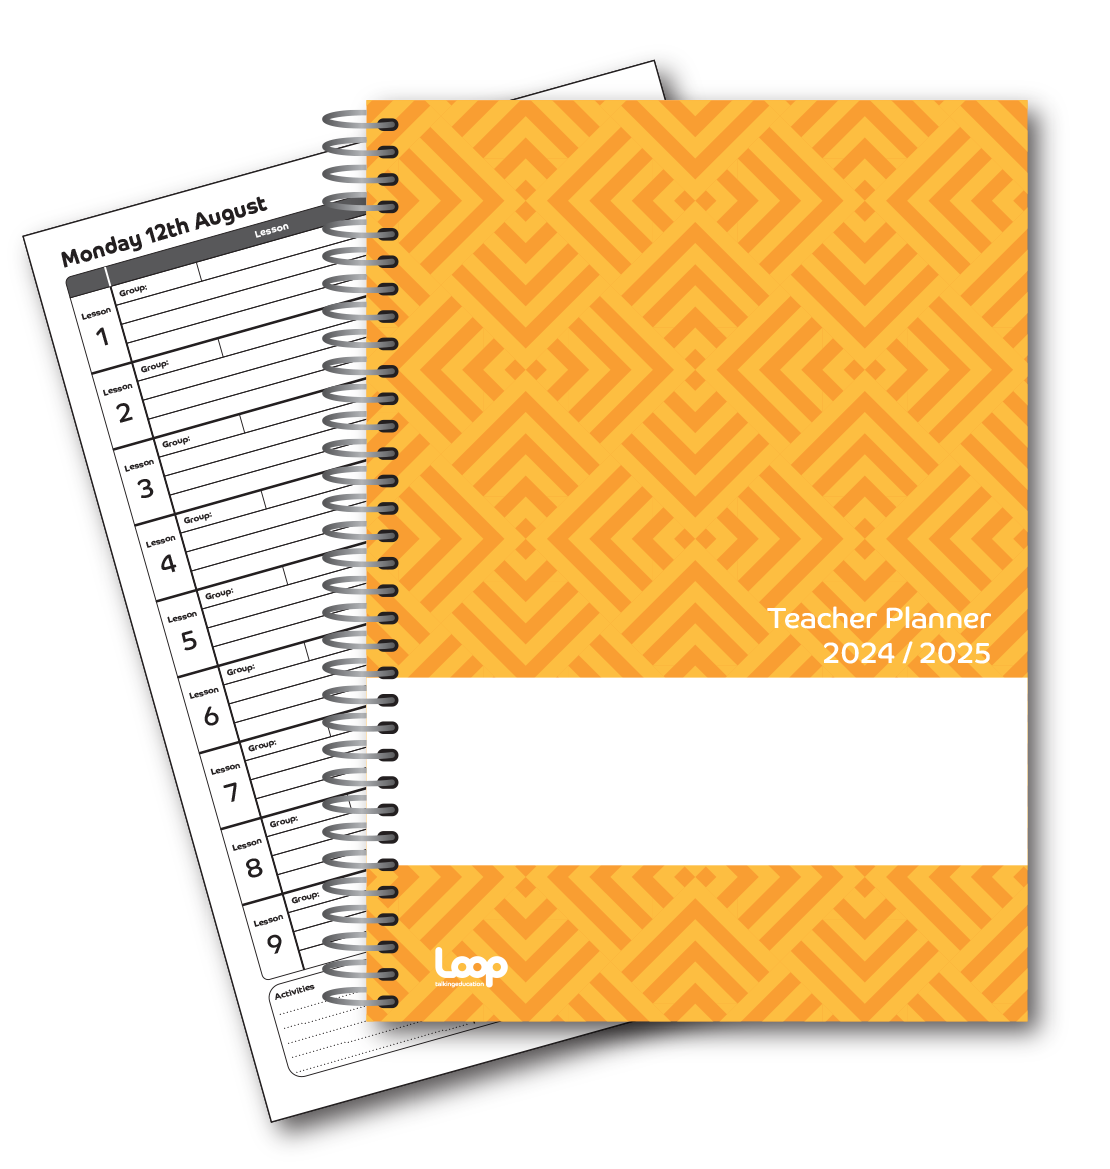 9 Lesson Dated Teacher Planner A5 size